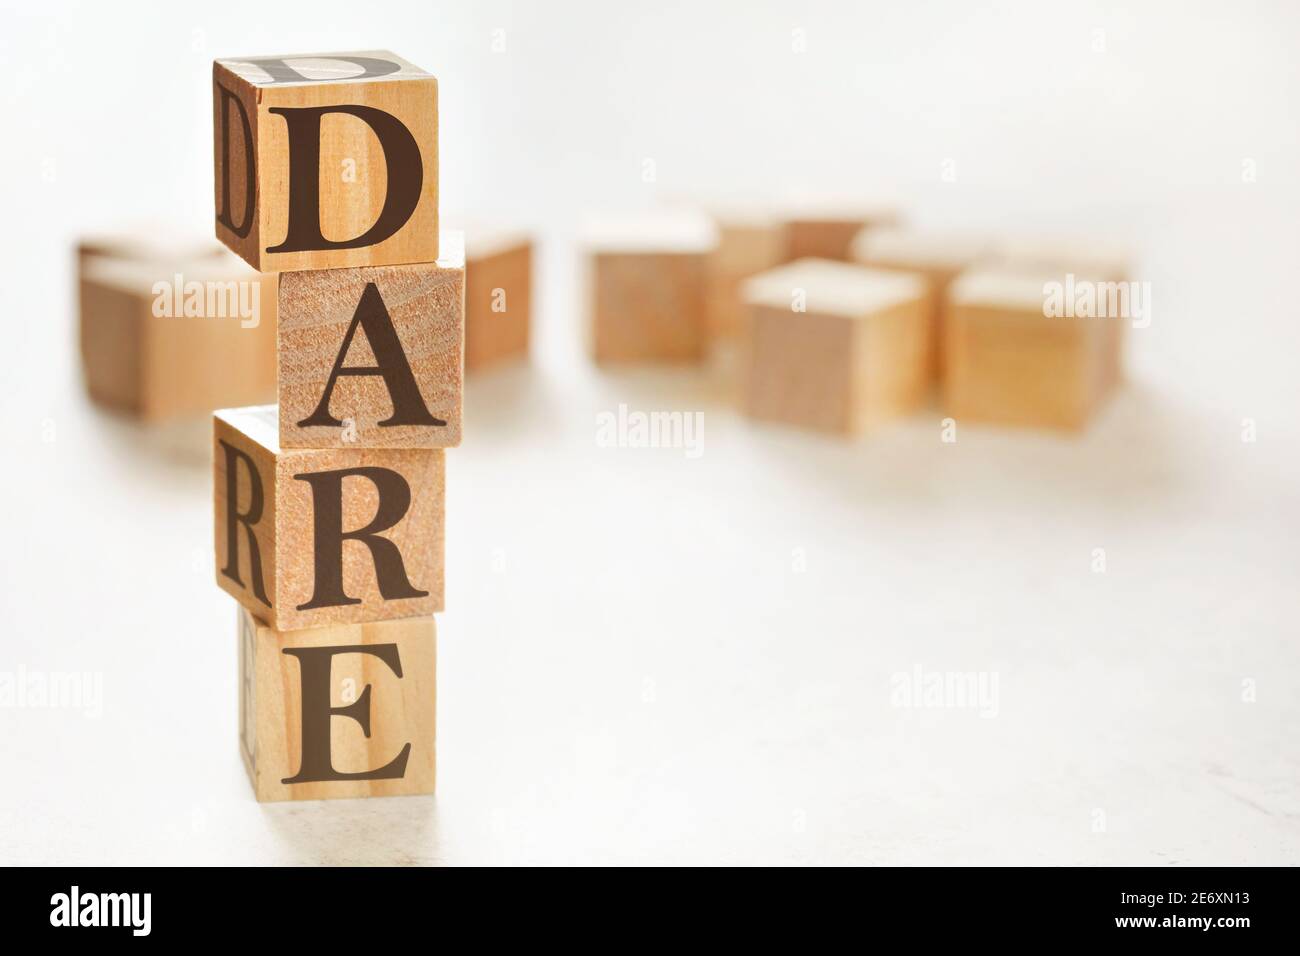 Four wooden cubes arranged in stack with text DARE (meaning Define, Assess, Respond, Evaluate) on them, space for text / image at down right corner Stock Photo